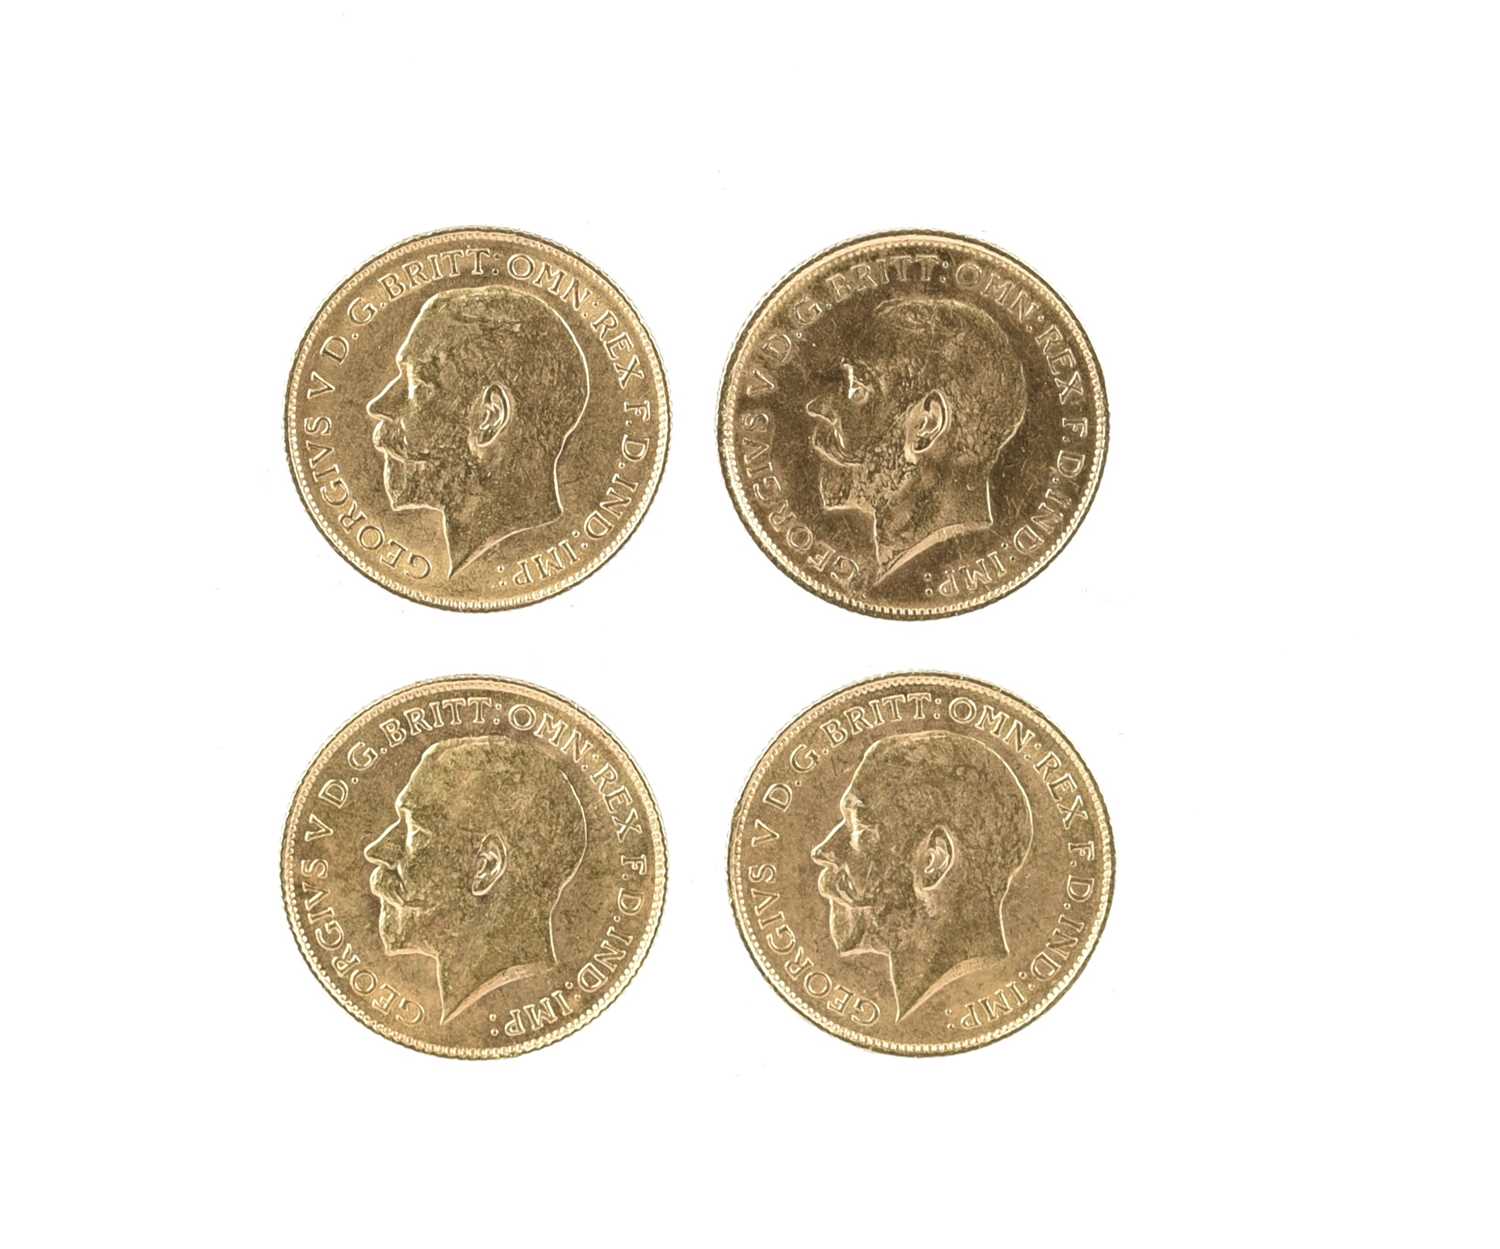 George V, gold half sovereigns (4): 1911, London Mint (S 4006), extremely fine; 1916, Sydney Mint (S